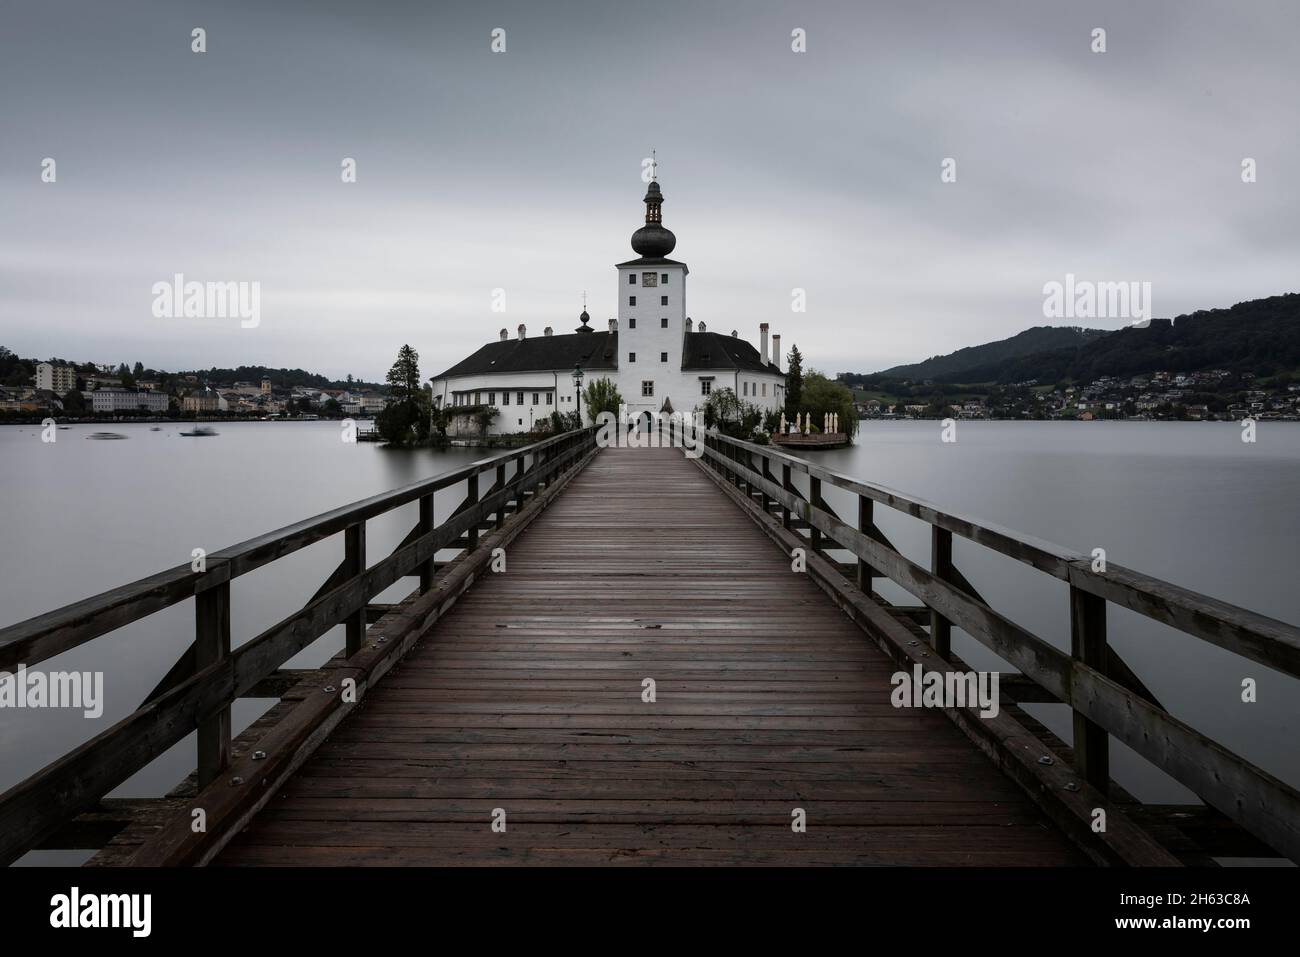 schloss orth am traunsee. Stockfoto